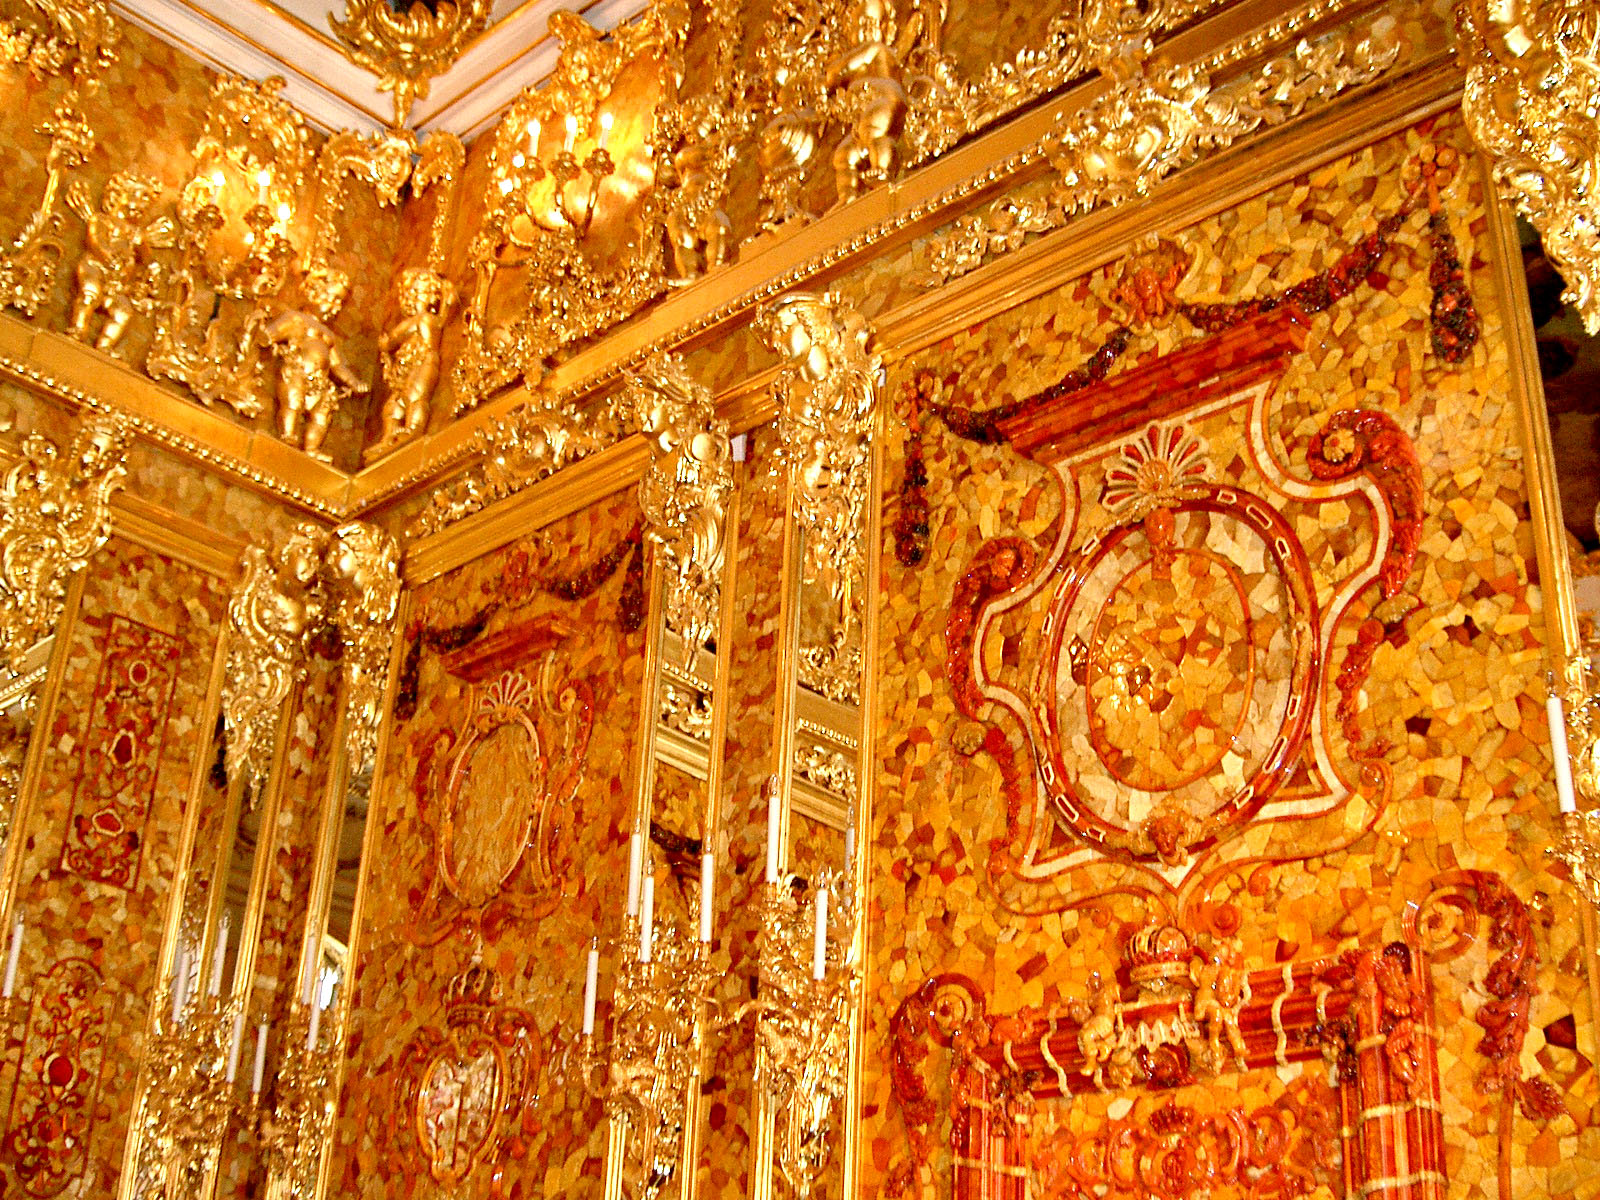 A reconstruction of the Amber Room's interior. / Wikimedia Commons, public domain